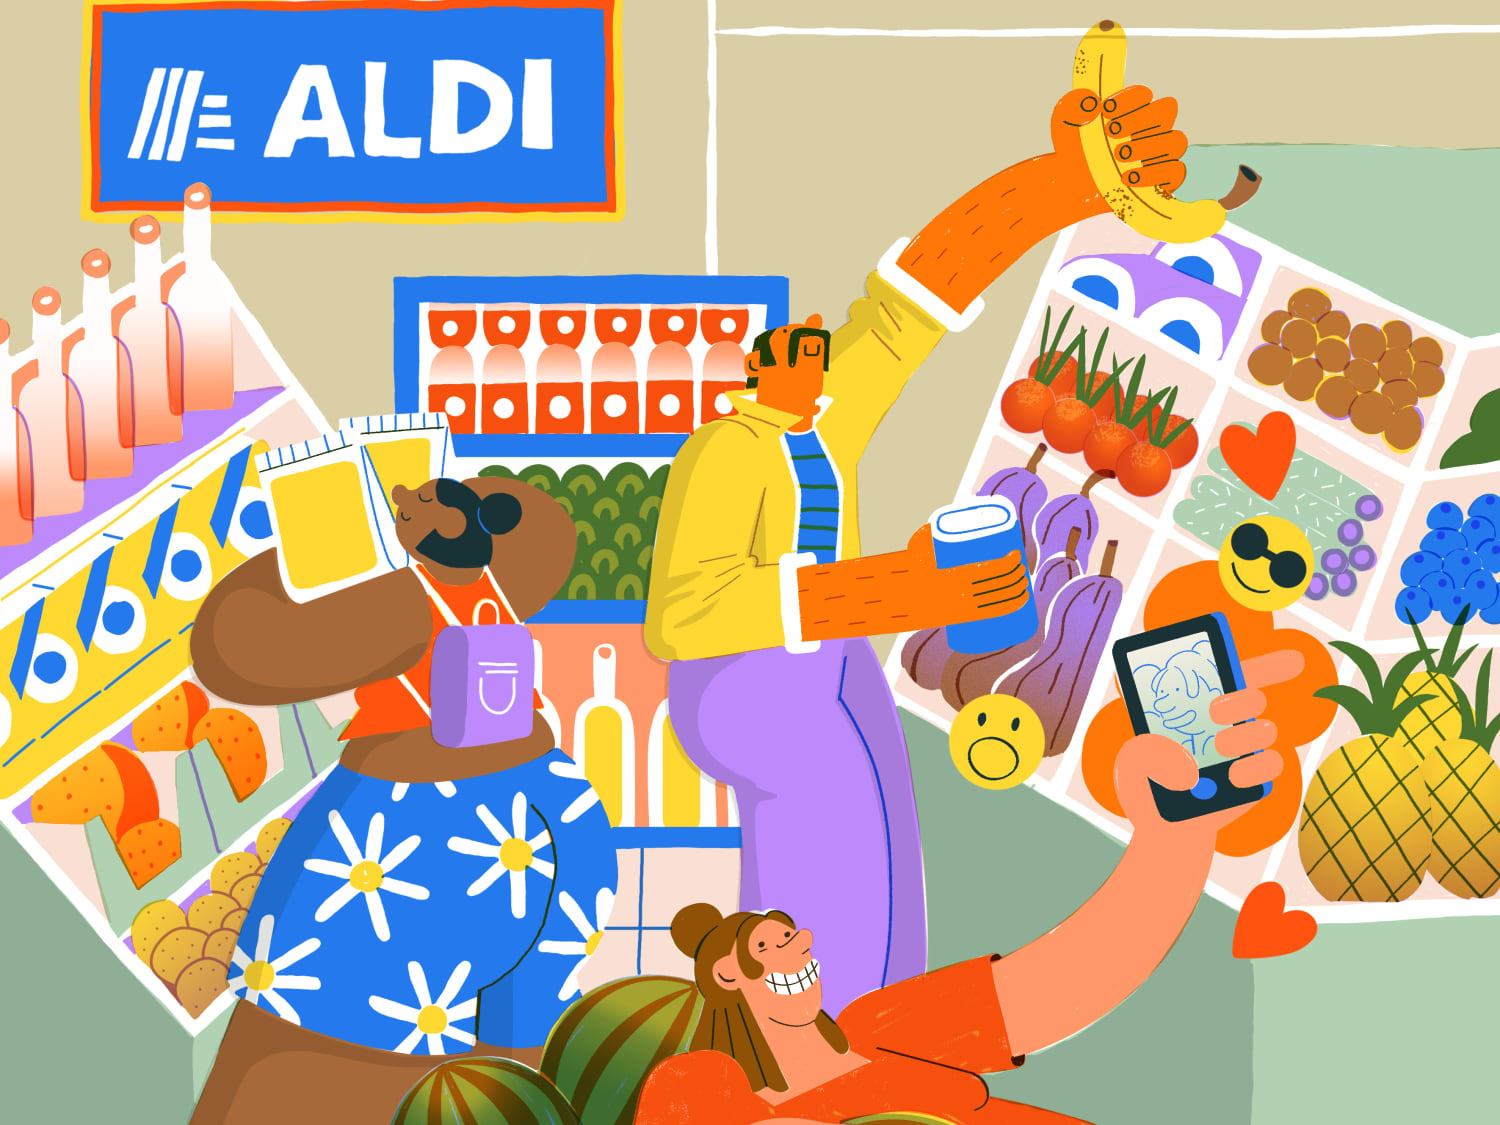 This Week at Aldi: The Ad for February 17, 2021